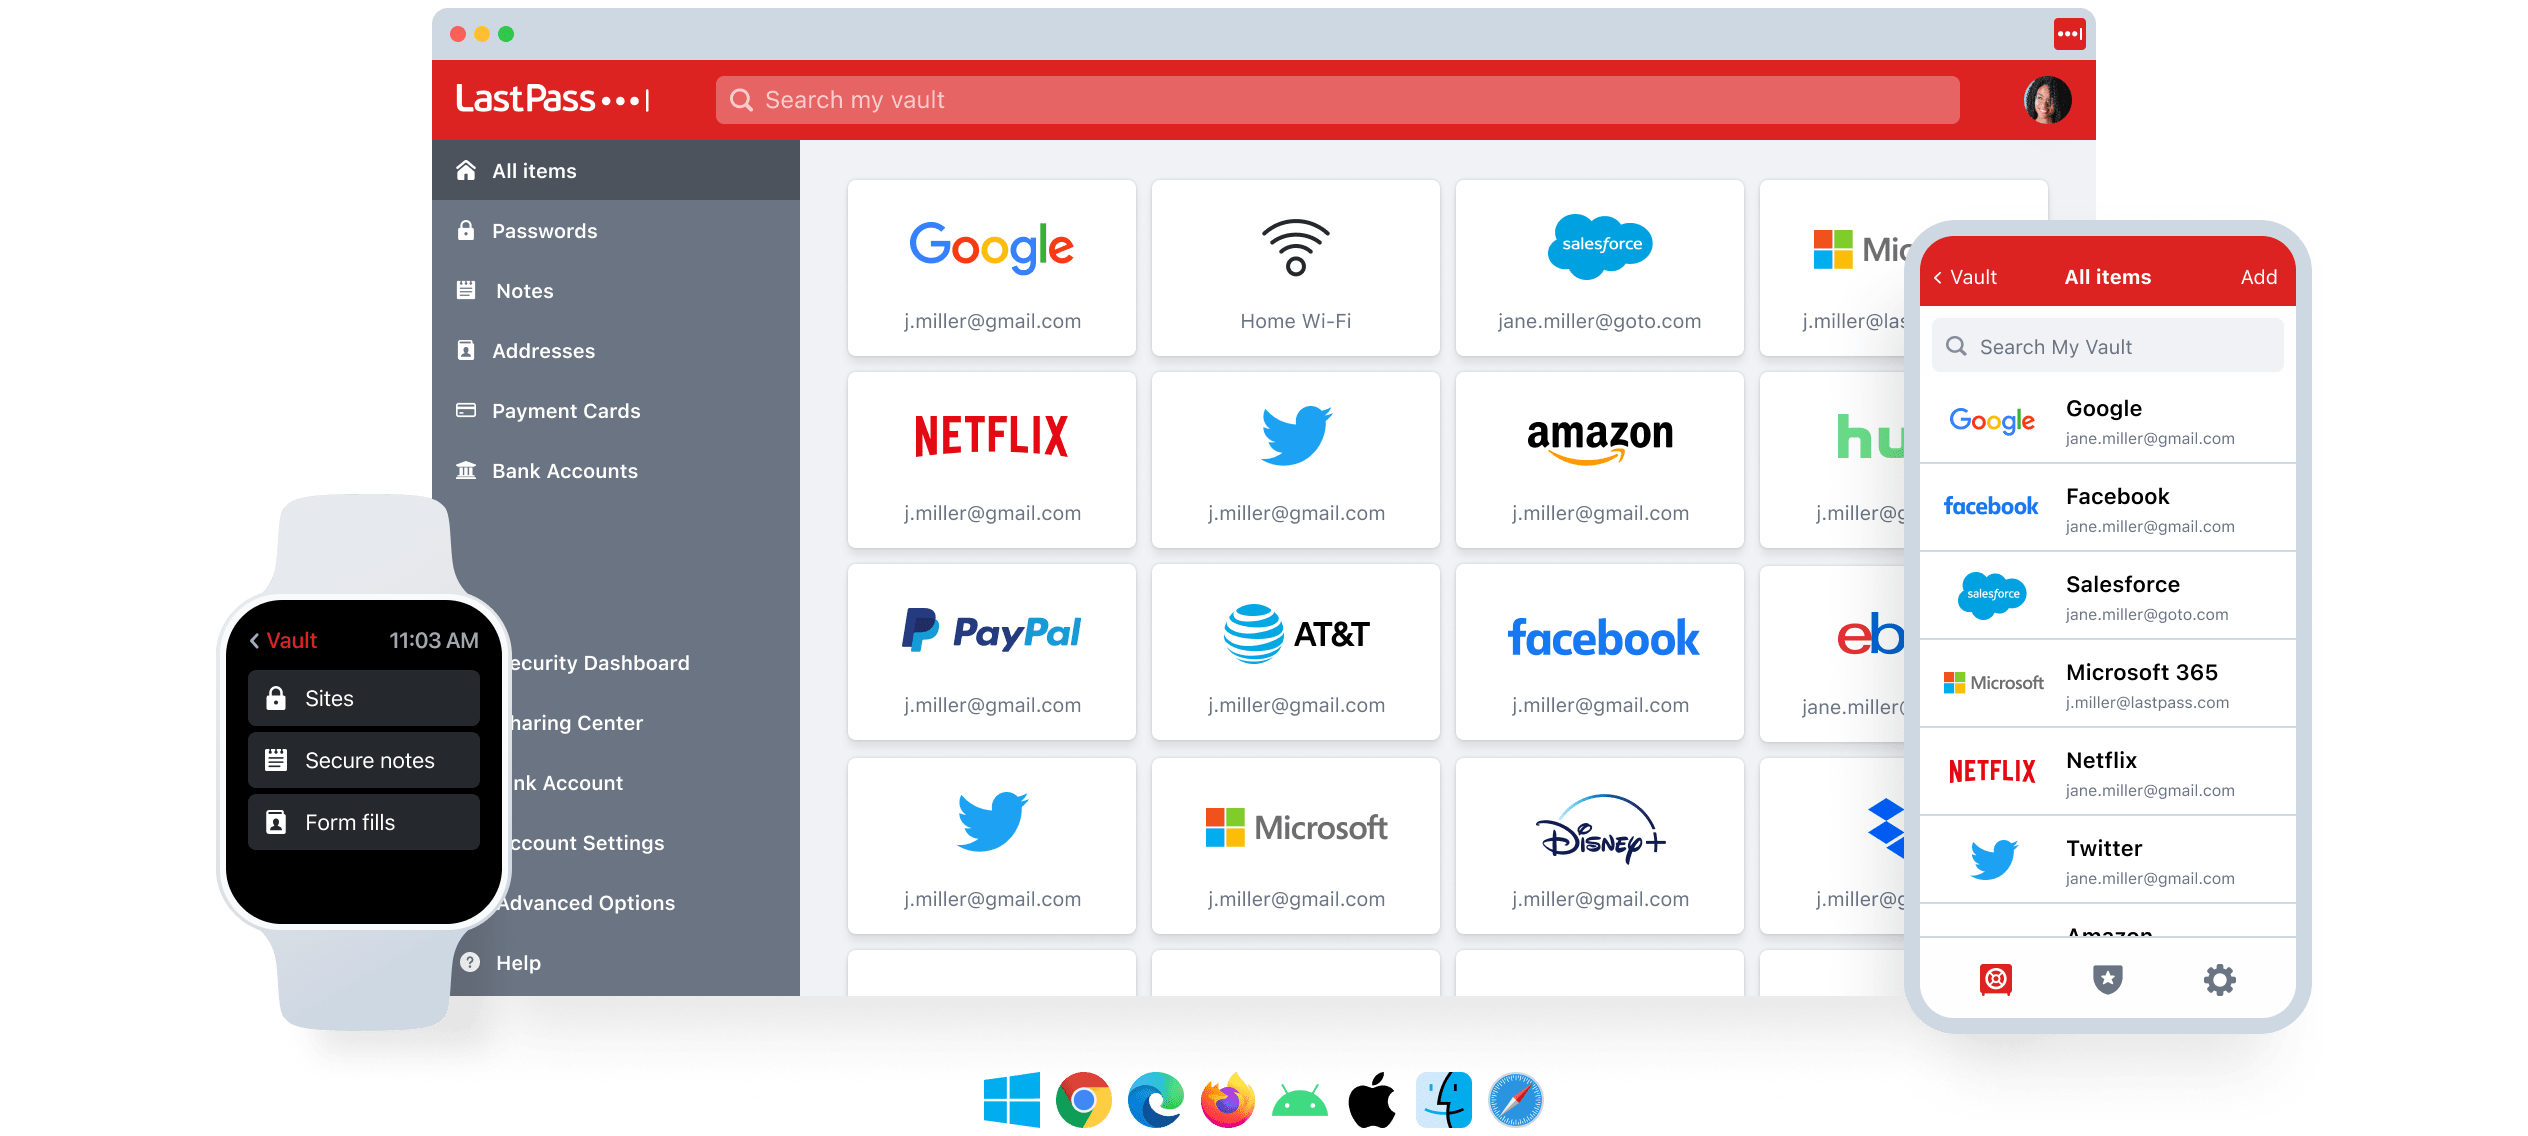 LastPass is used across devices